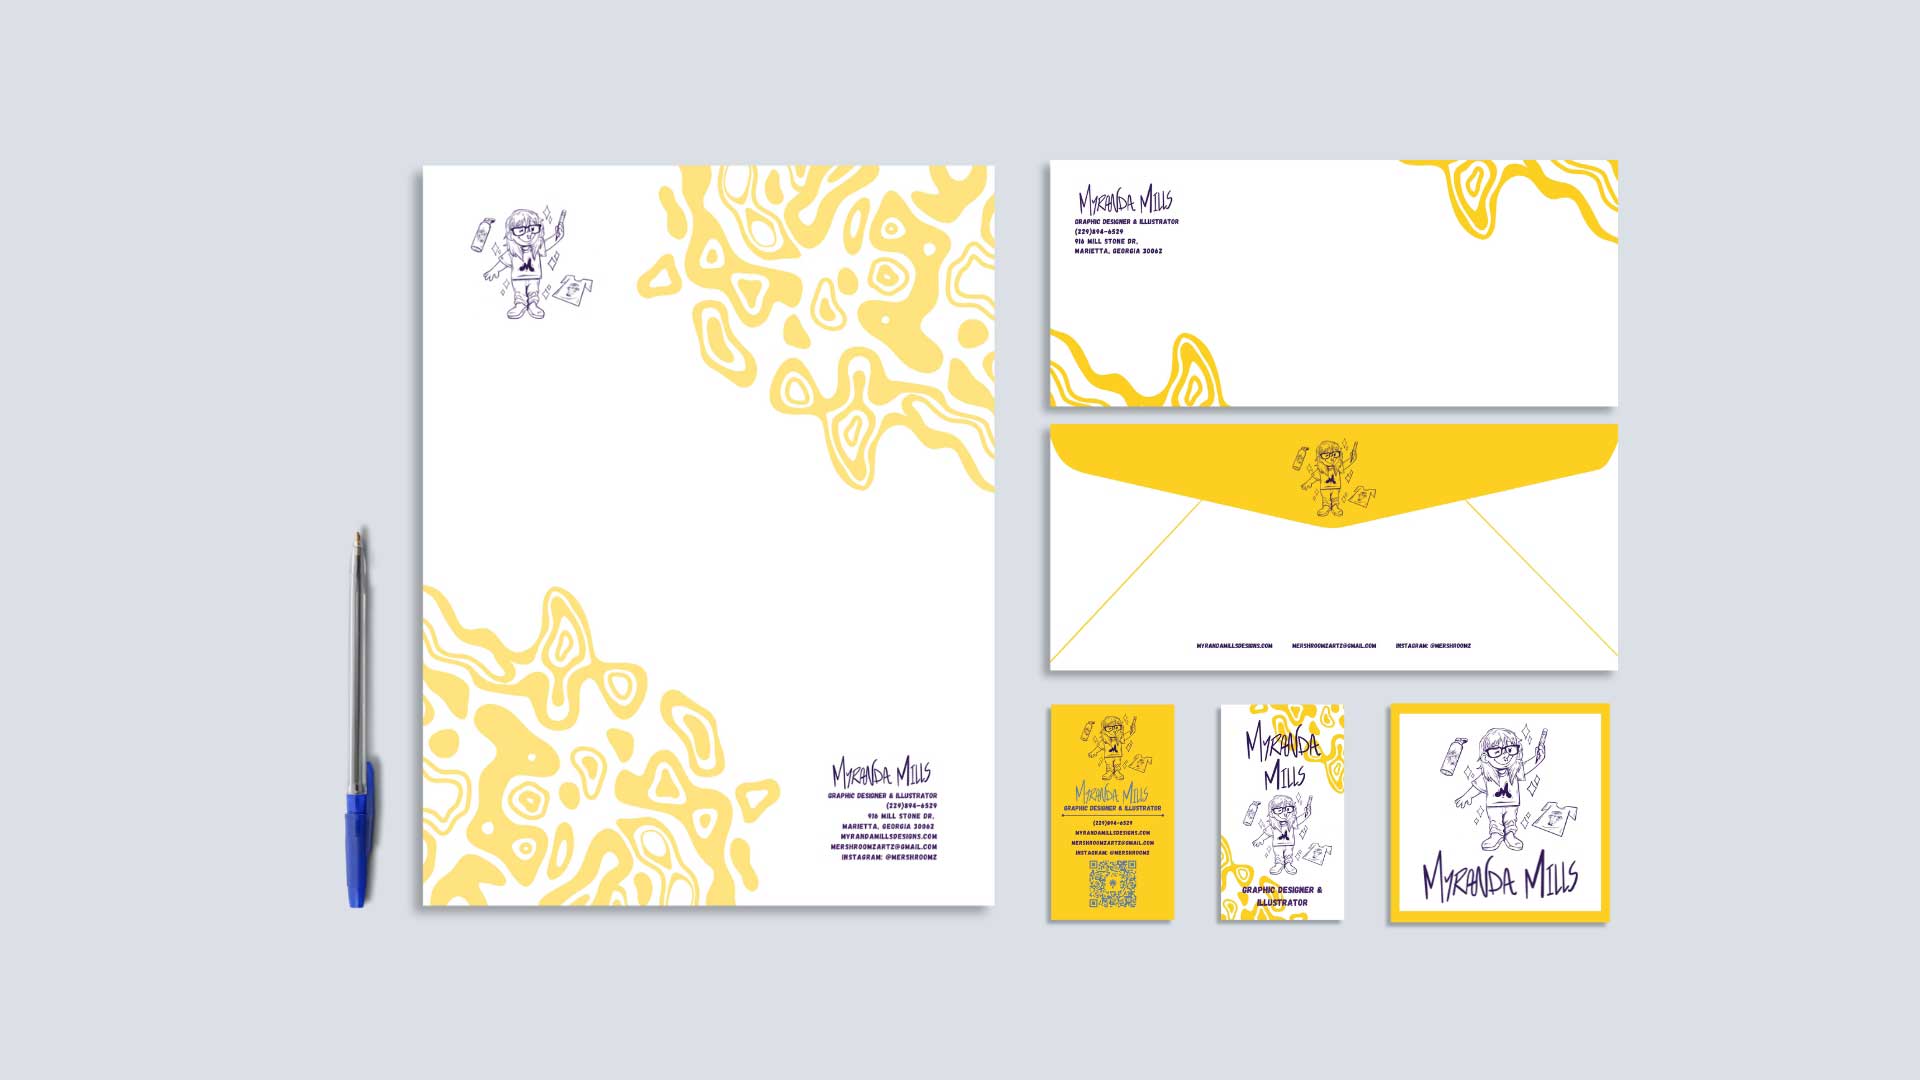 Self-Marketing Stationary /  Stationary for Myranda Mills‚Äô brand 8.5 x 11, 4.125 x 9.5, 3.5 x 2, printed letterhead, envelope, and business card. Printed 2023. This stationery is to showcase myself through communication and advertisement through prospective